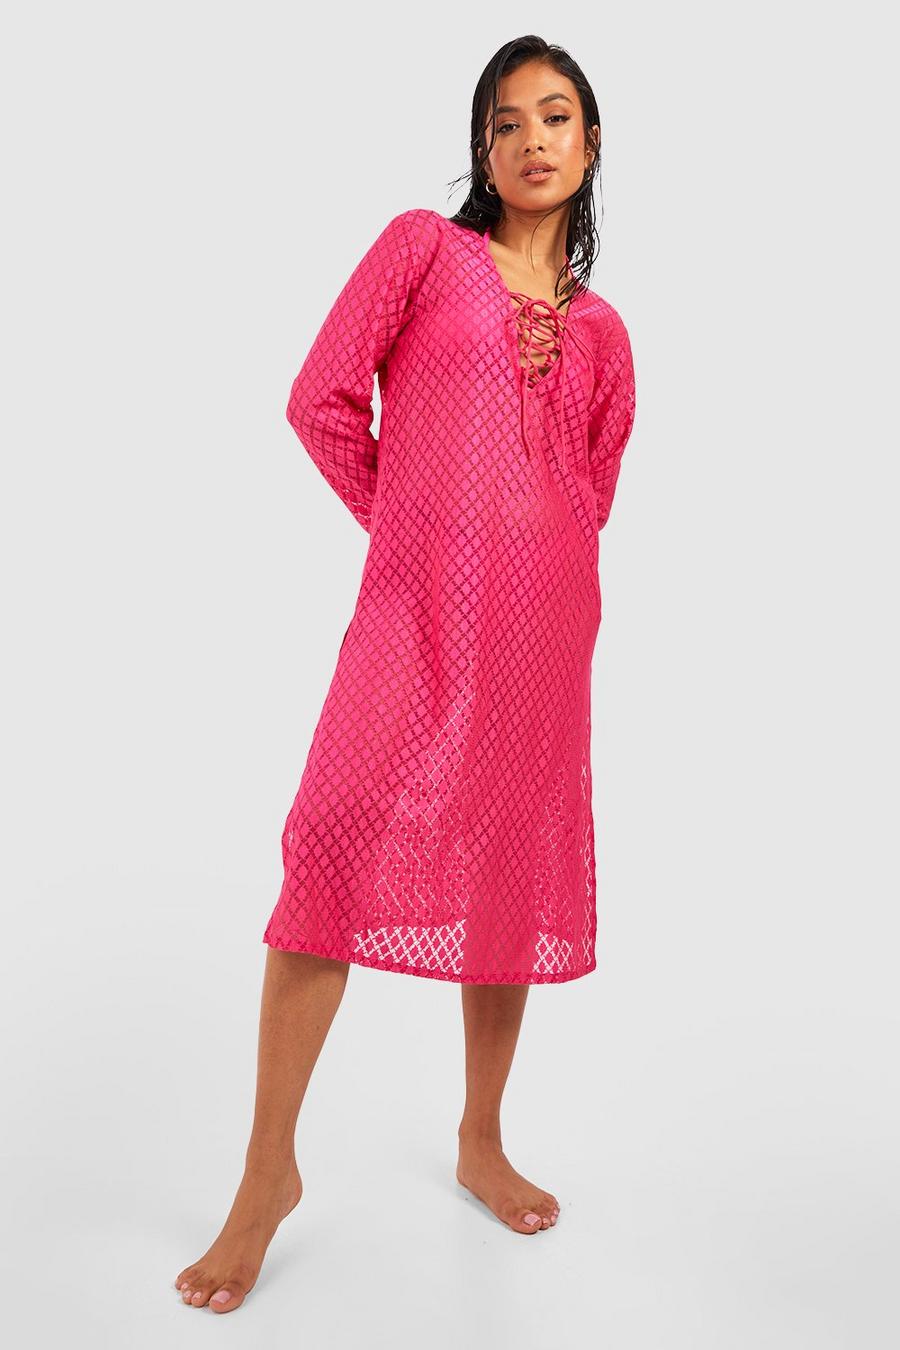 Hot pink Petite Lace Up Crochet Beach Midi Dress Authentic image number 1